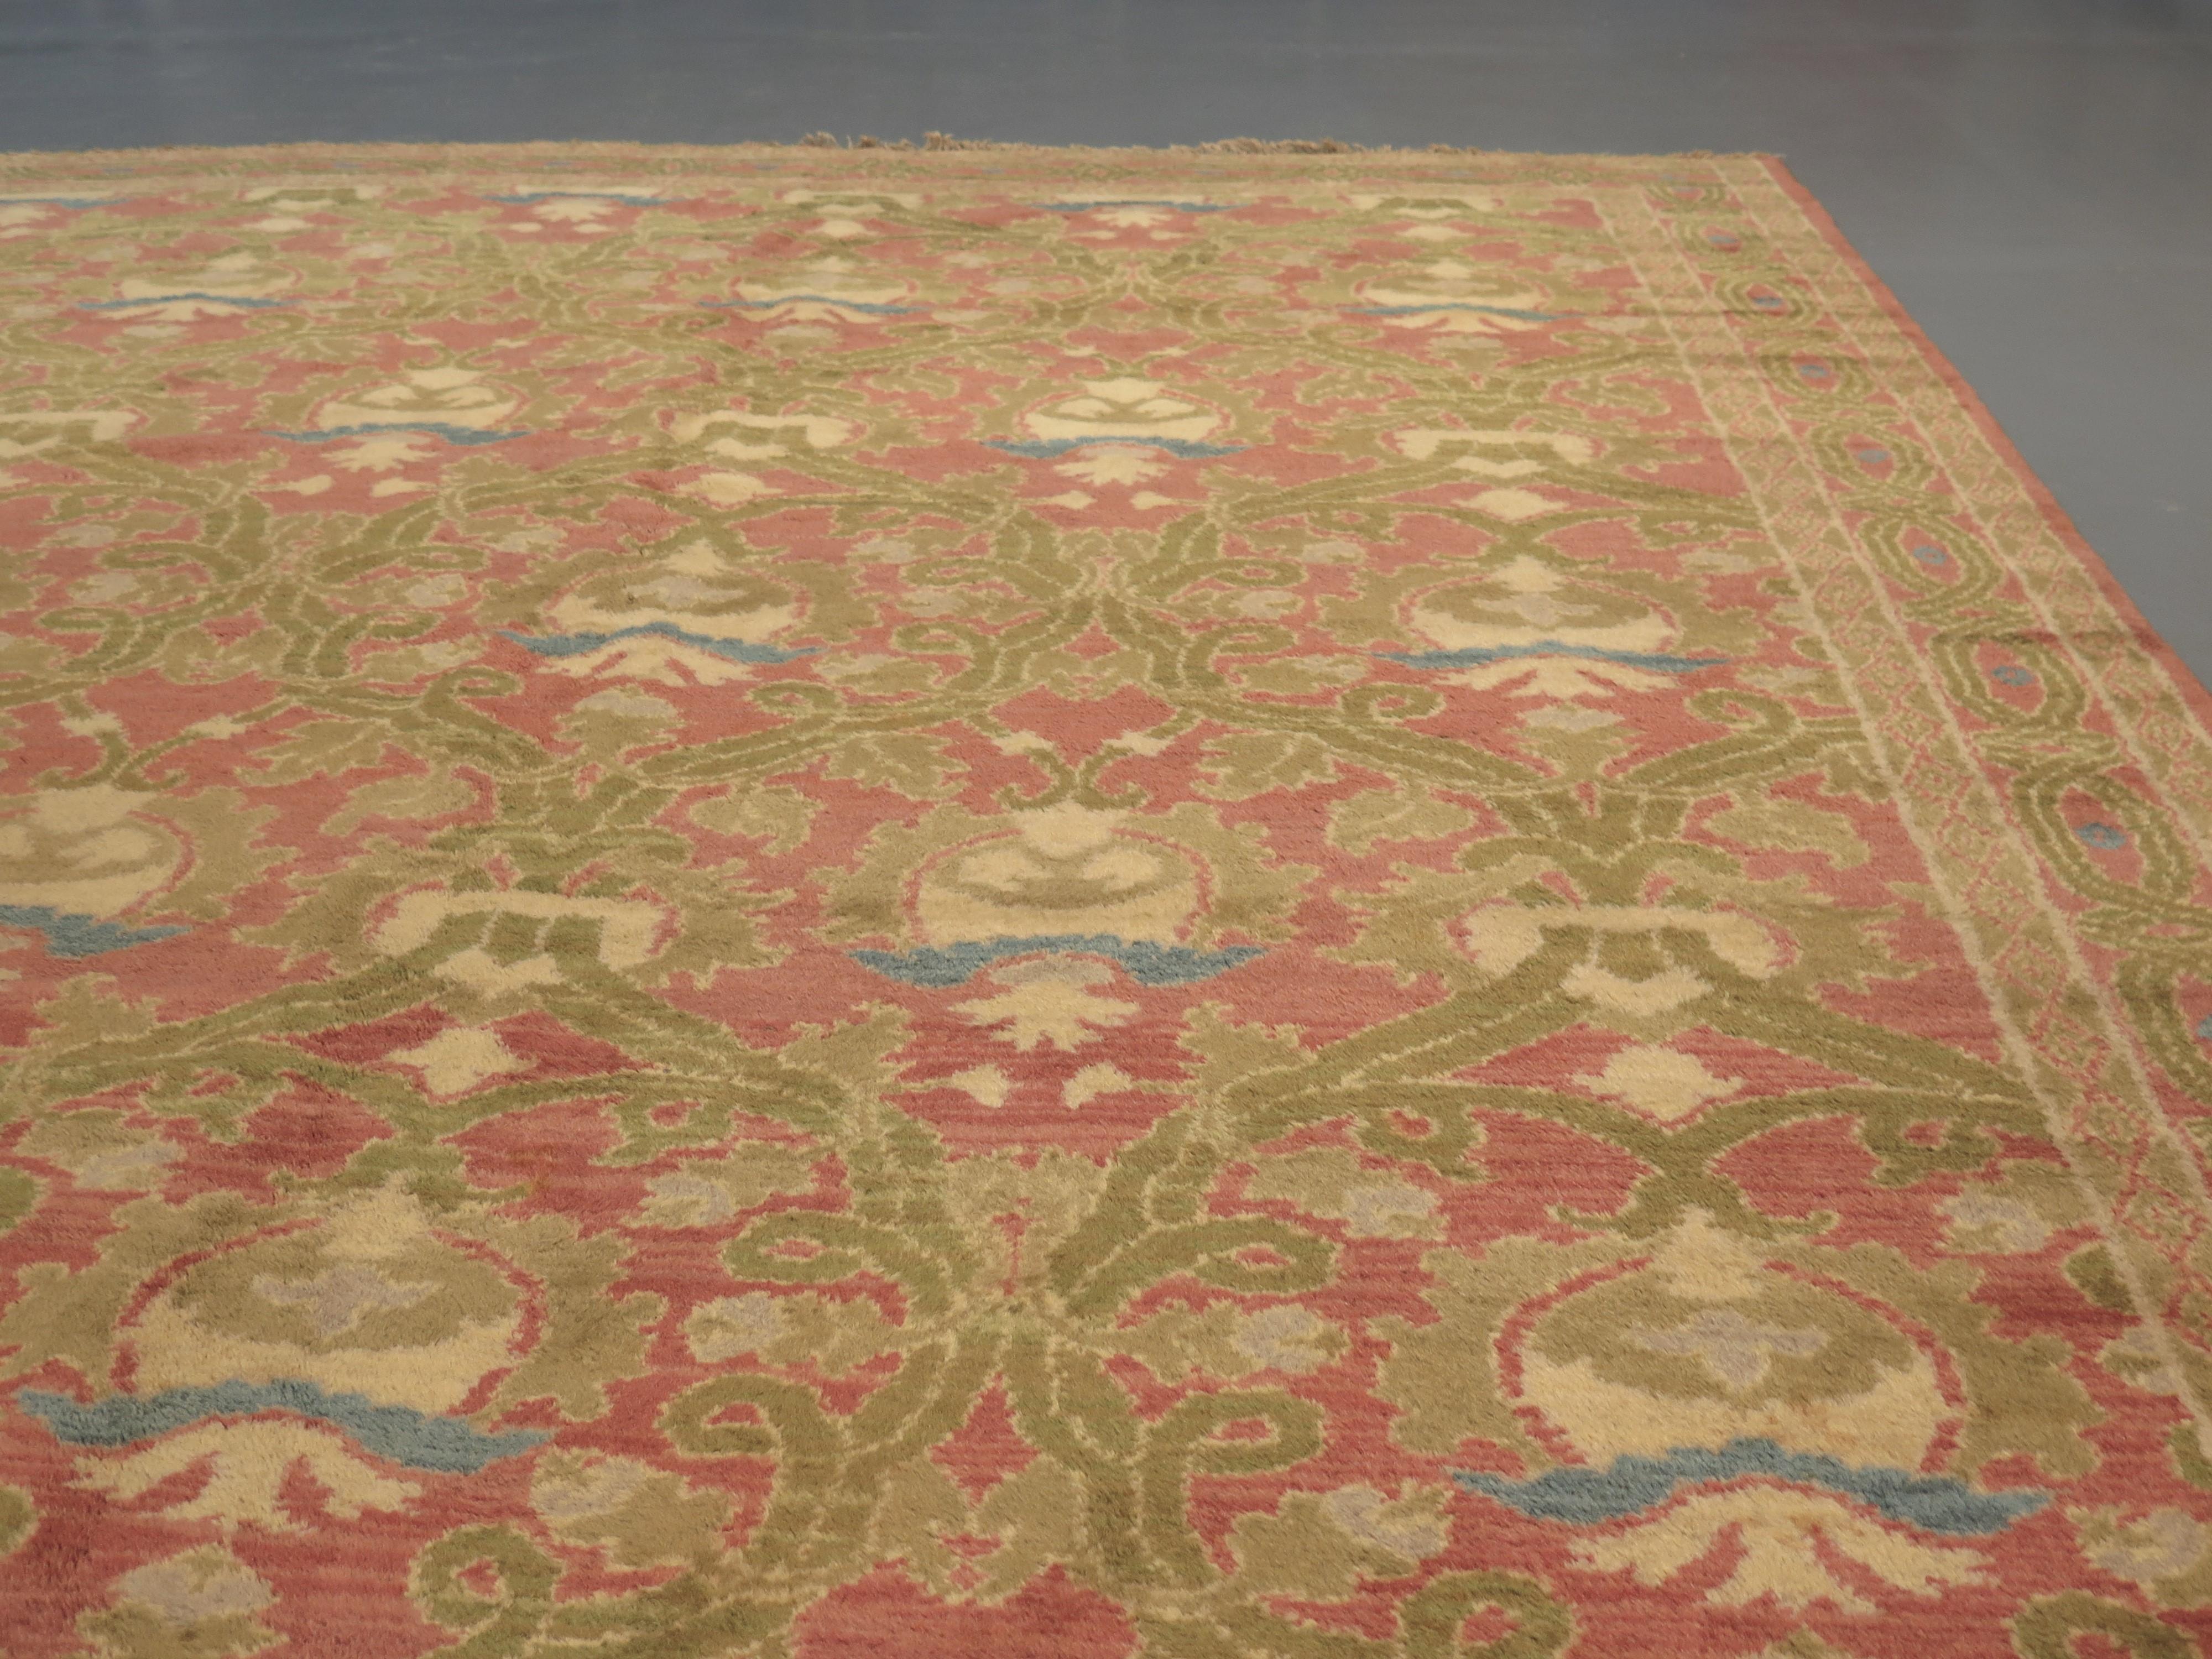 An attractive early 20th century Cuenca carpet which is influenced by the Arts and Crafts Movement which flourished in Europe and North America between 1880 and 1920.

This Cuenca carpet has a fresh array of vegetable-dyed colours with a